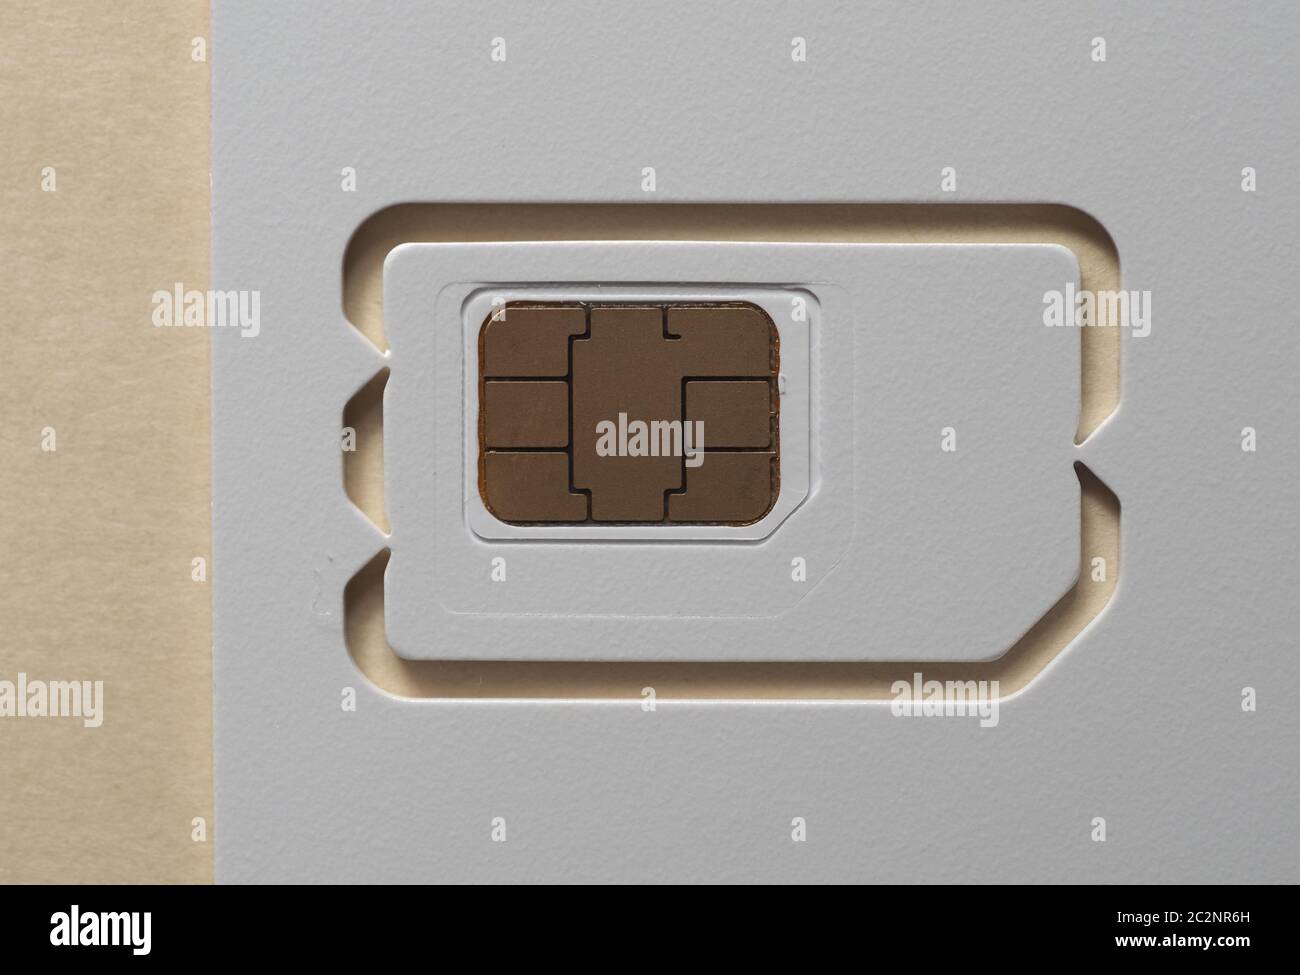 Trio sim card (including standard, micro and nano size) for mobile phone Stock Photo